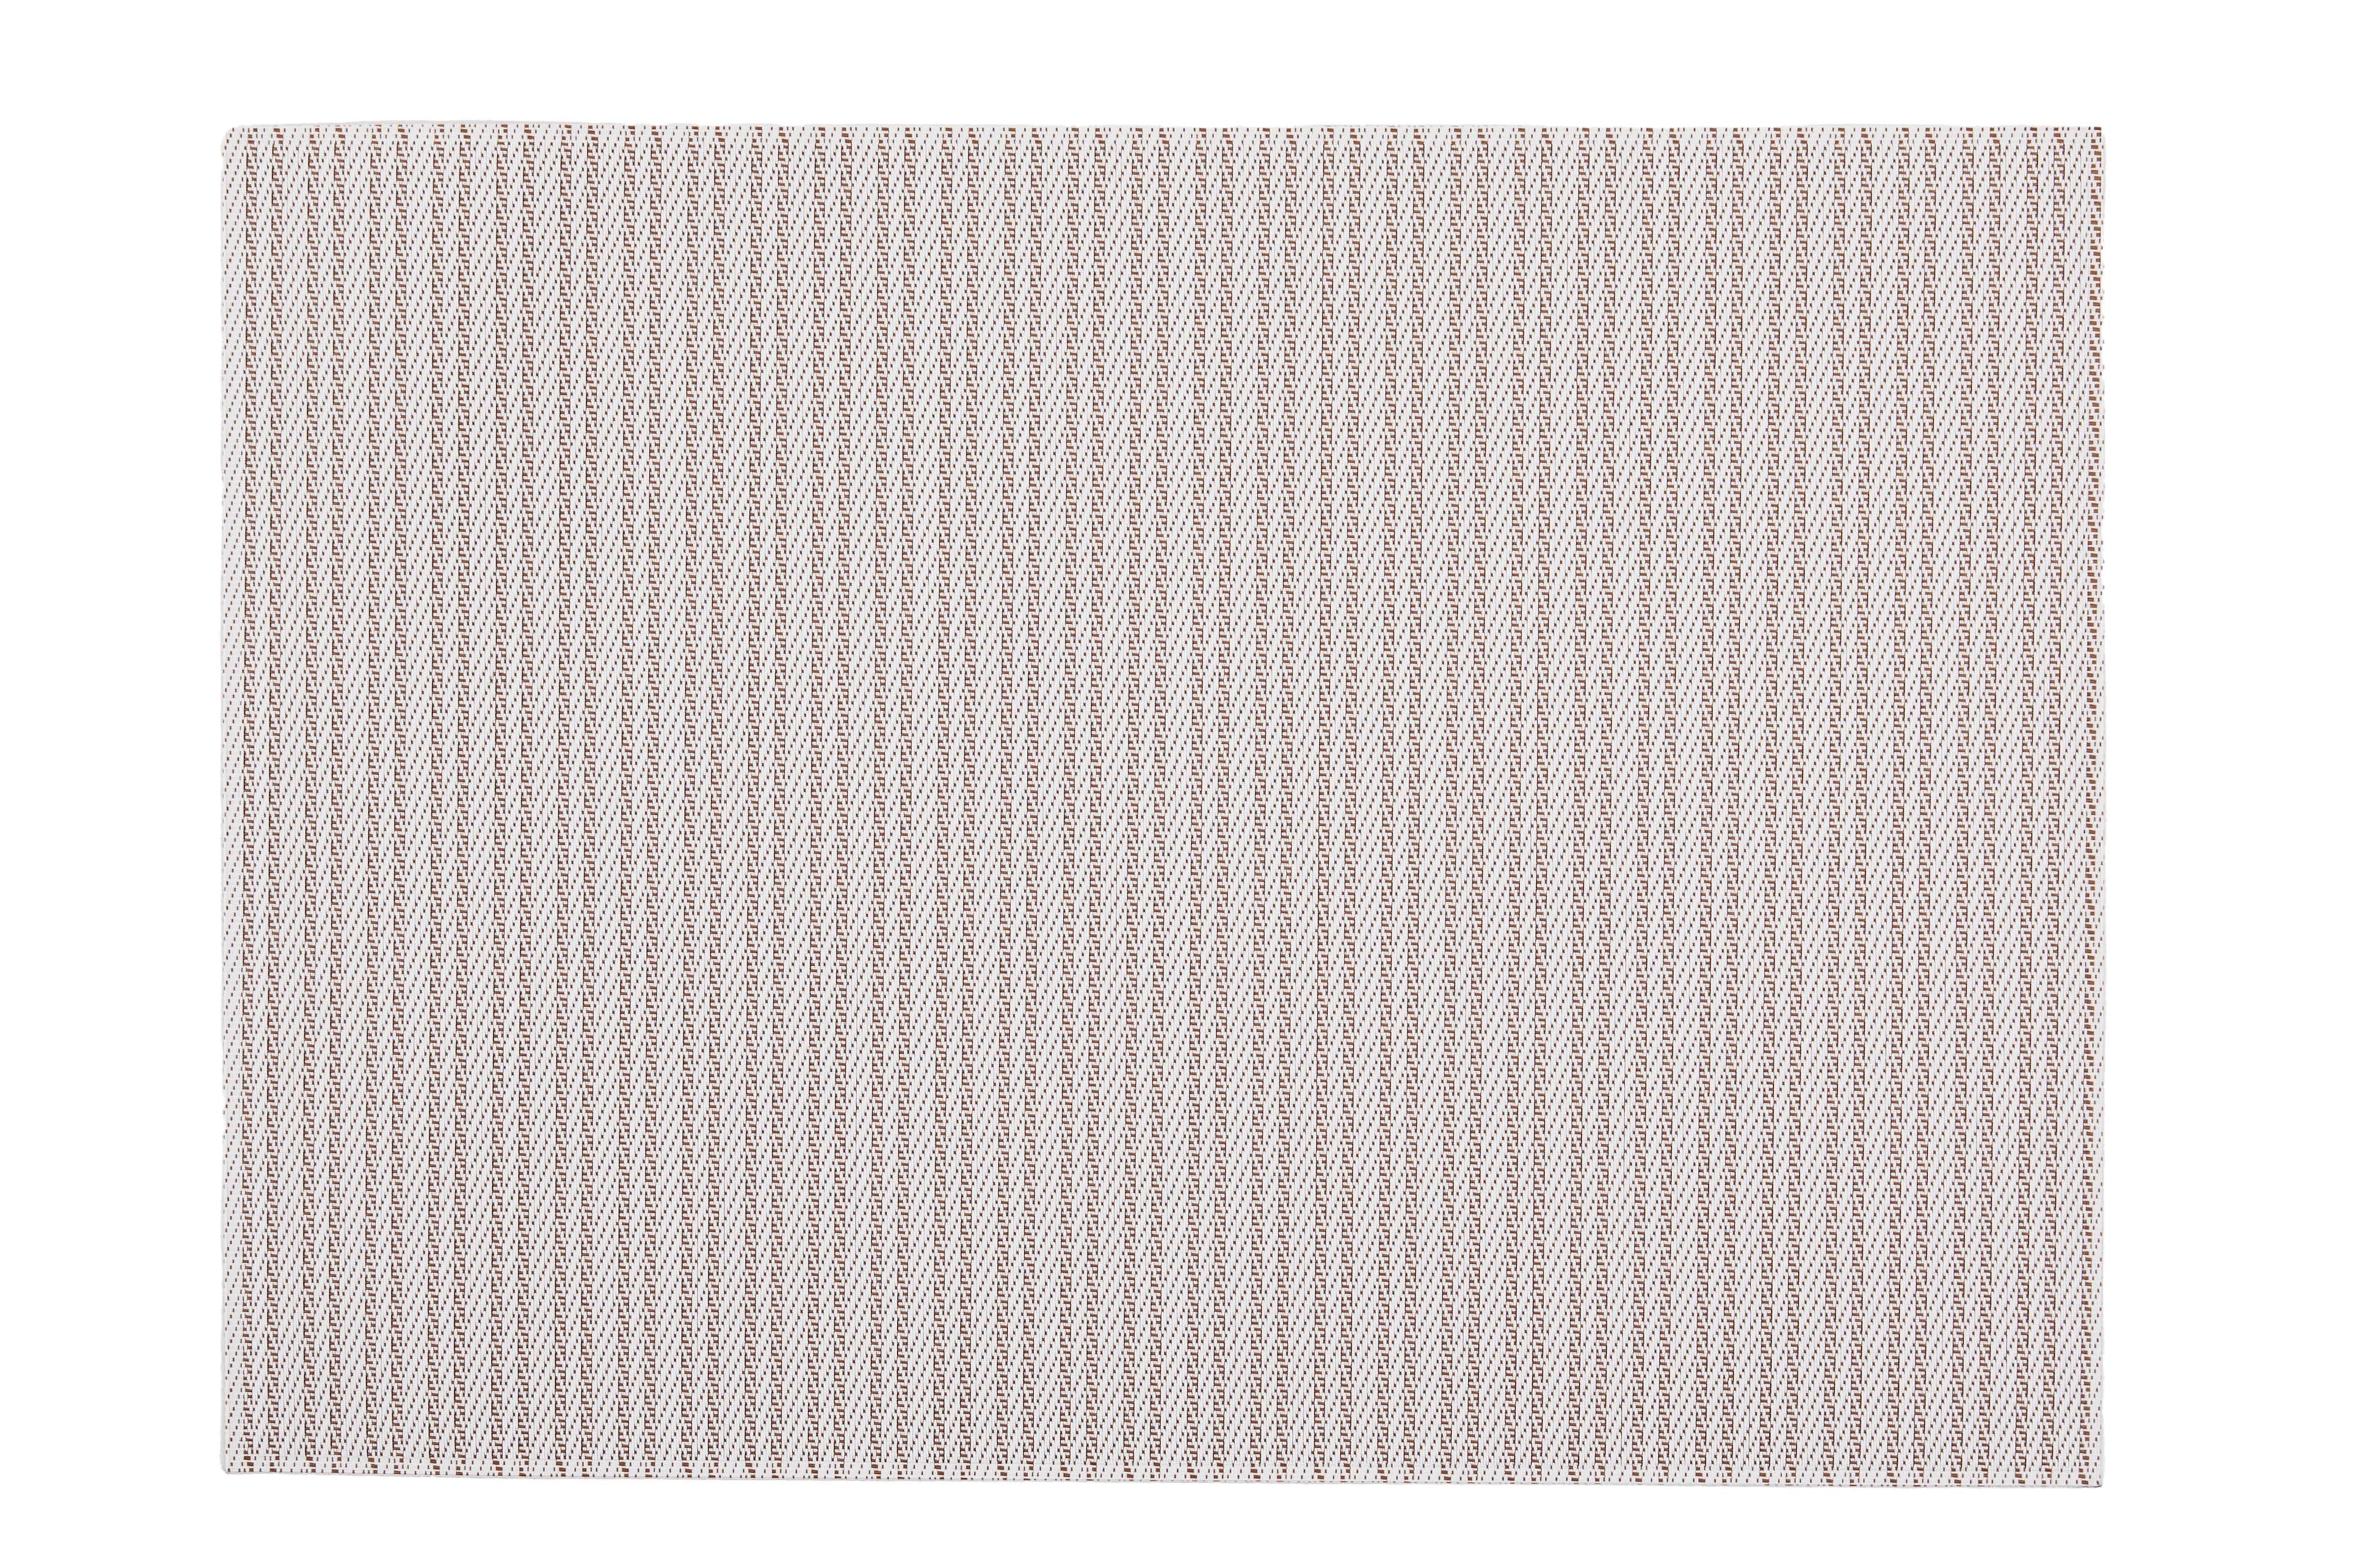 Placemat FALLON rechthoekig, 33x45cm, dubbele streep donker taupe